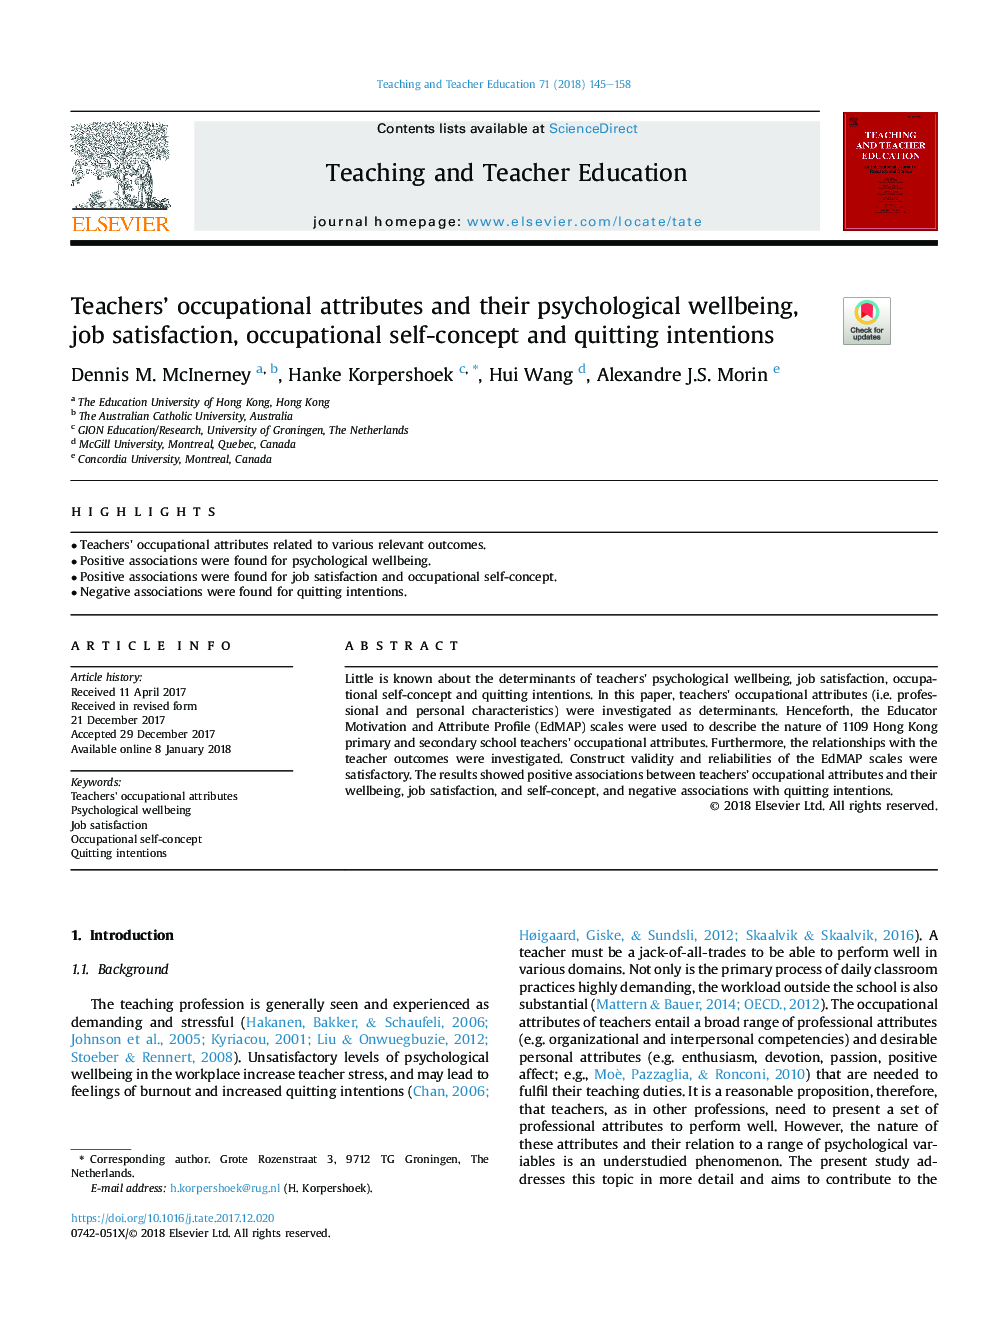 Teachers' occupational attributes and their psychological wellbeing, job satisfaction, occupational self-concept and quitting intentions